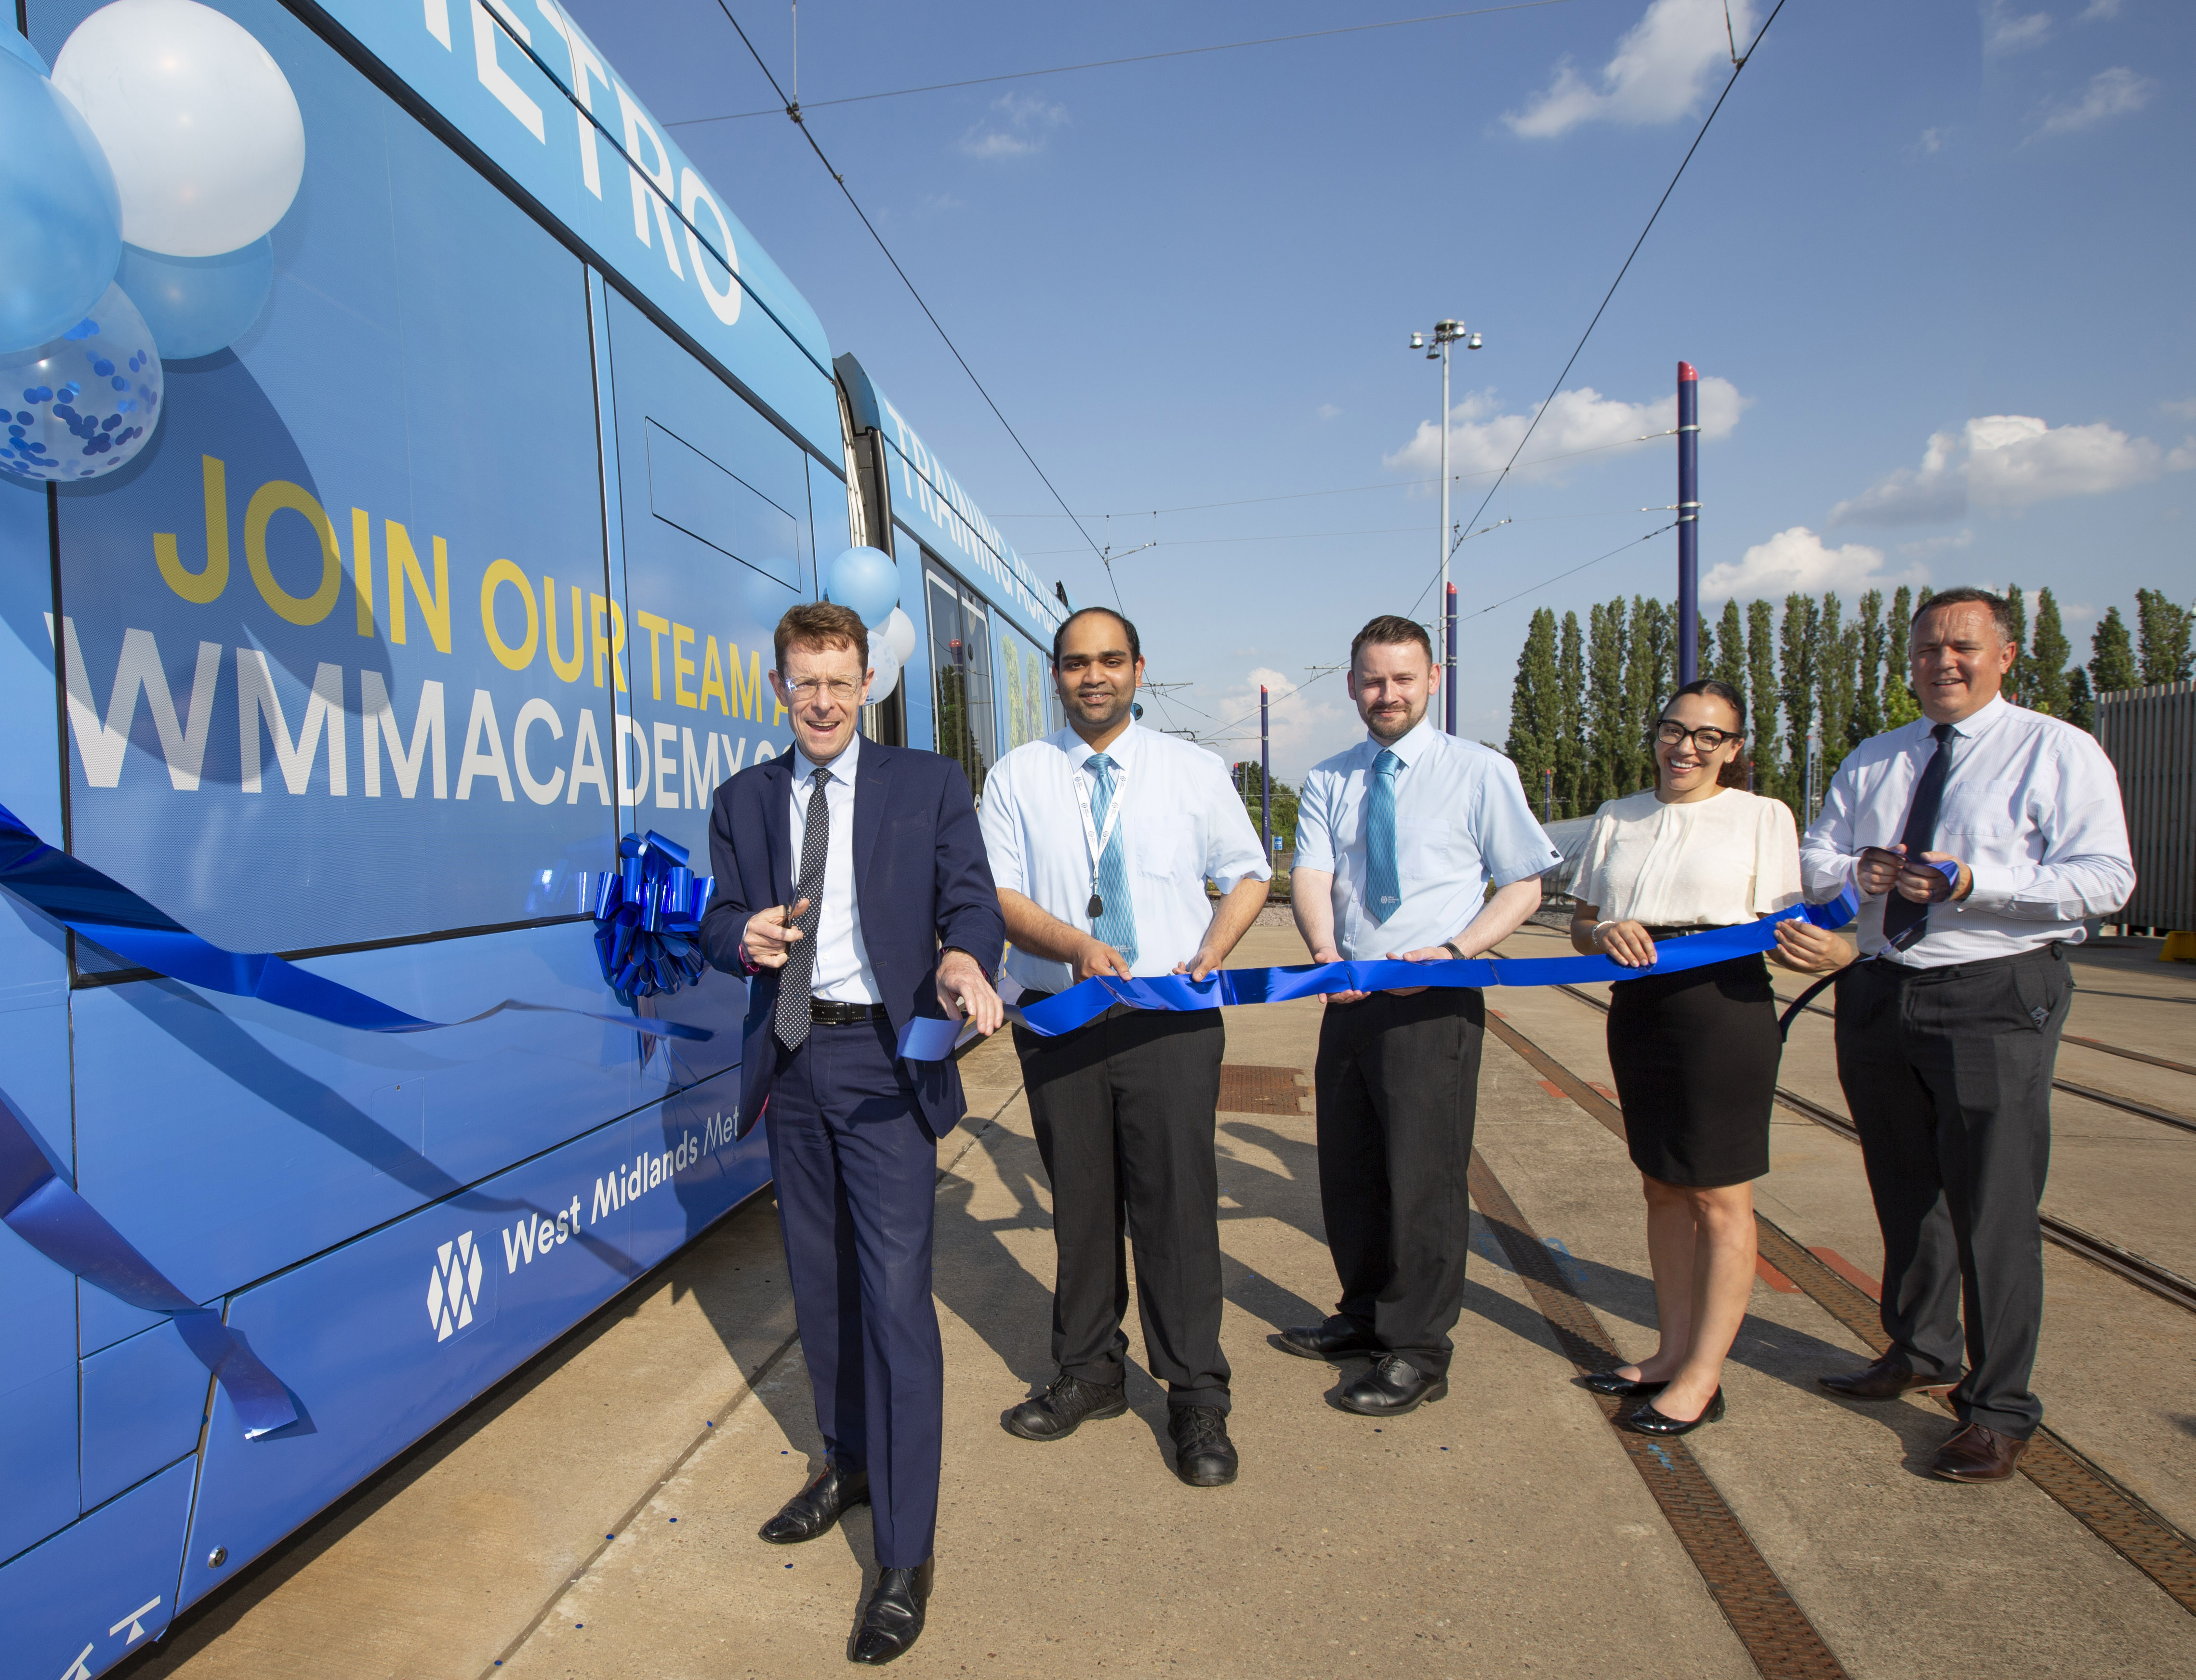 Mayor of the West Midlands Andy Street at the opening of the new Academy with members of the West Midlands Metro Team (left to right), recently qualified drivers Amal Prasad and Phillip Corbett-Butler, commercial director Sophie Allison and Anthony Stanley, head of quality, health and safety and environment.